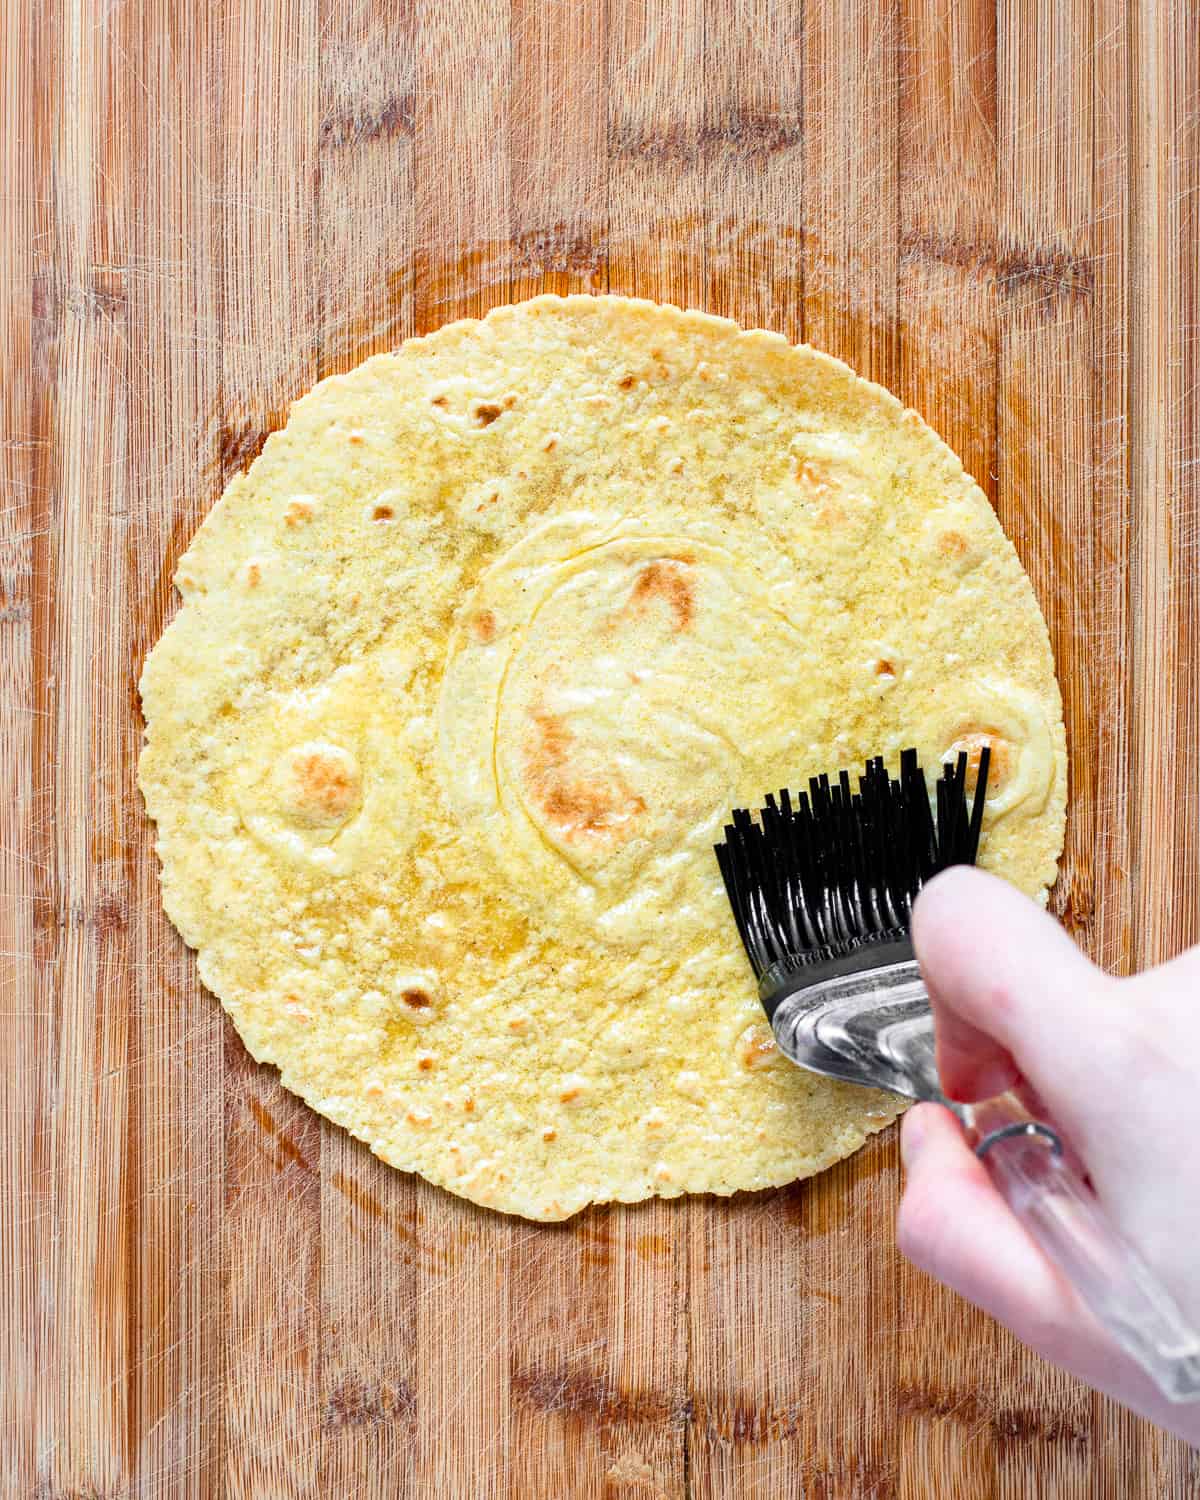 Hand brushing oil onto a yellow tortillas with a silicon brush.